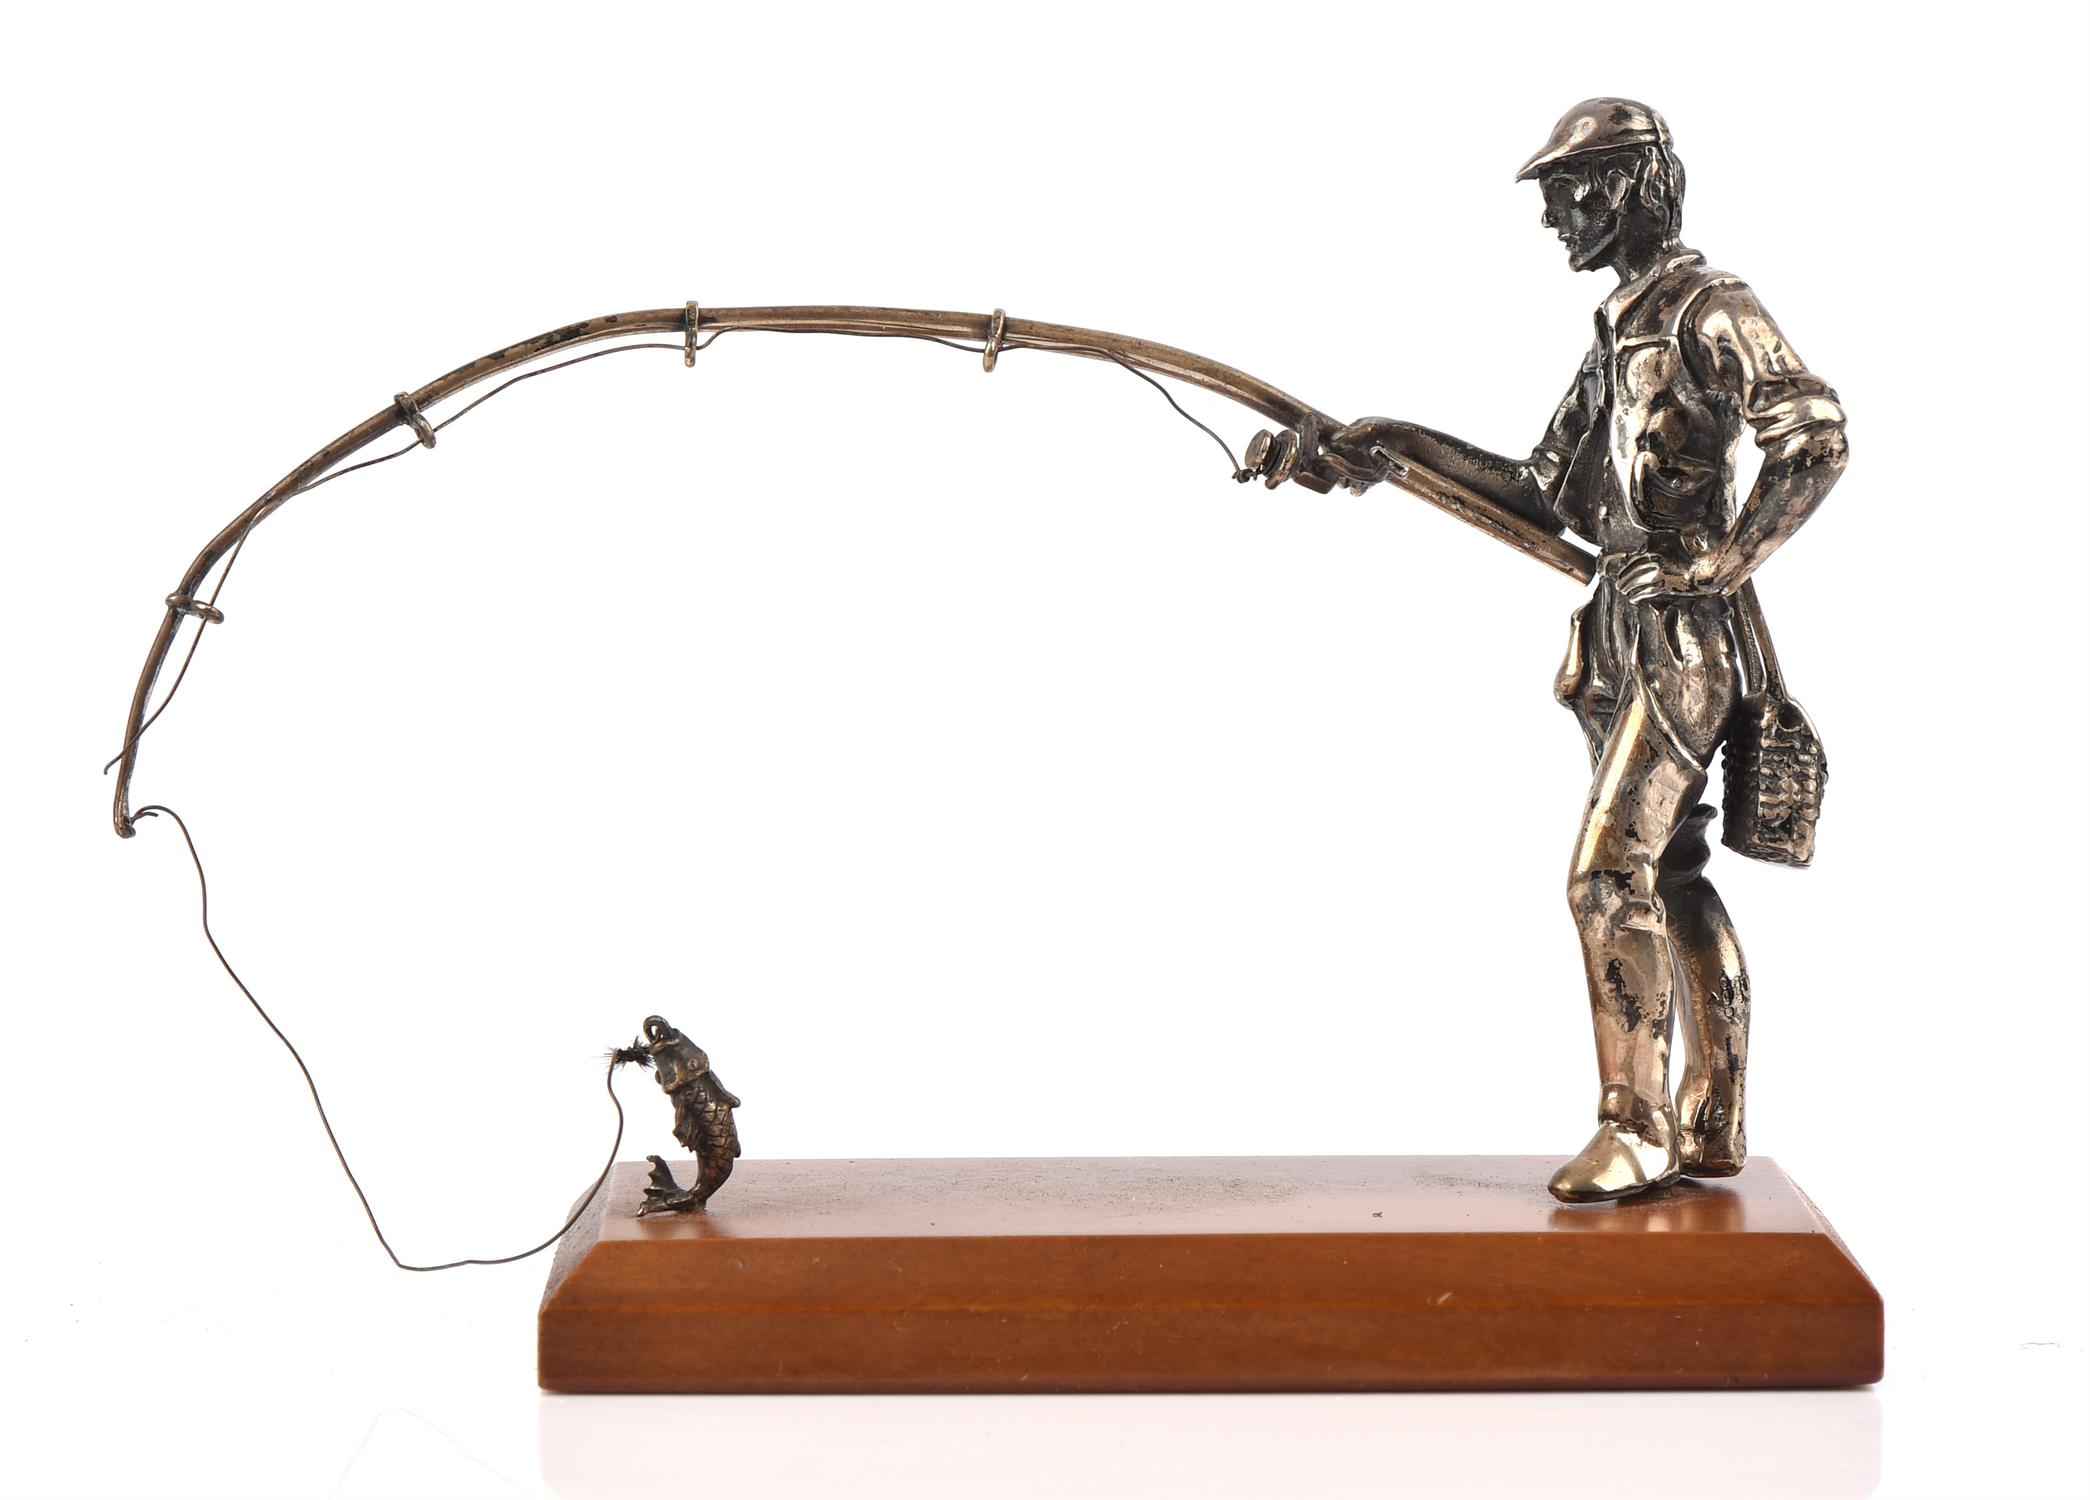 Cast silver figure of a fisherman holding a rod with fish on line by M & SJ import, London, 1860